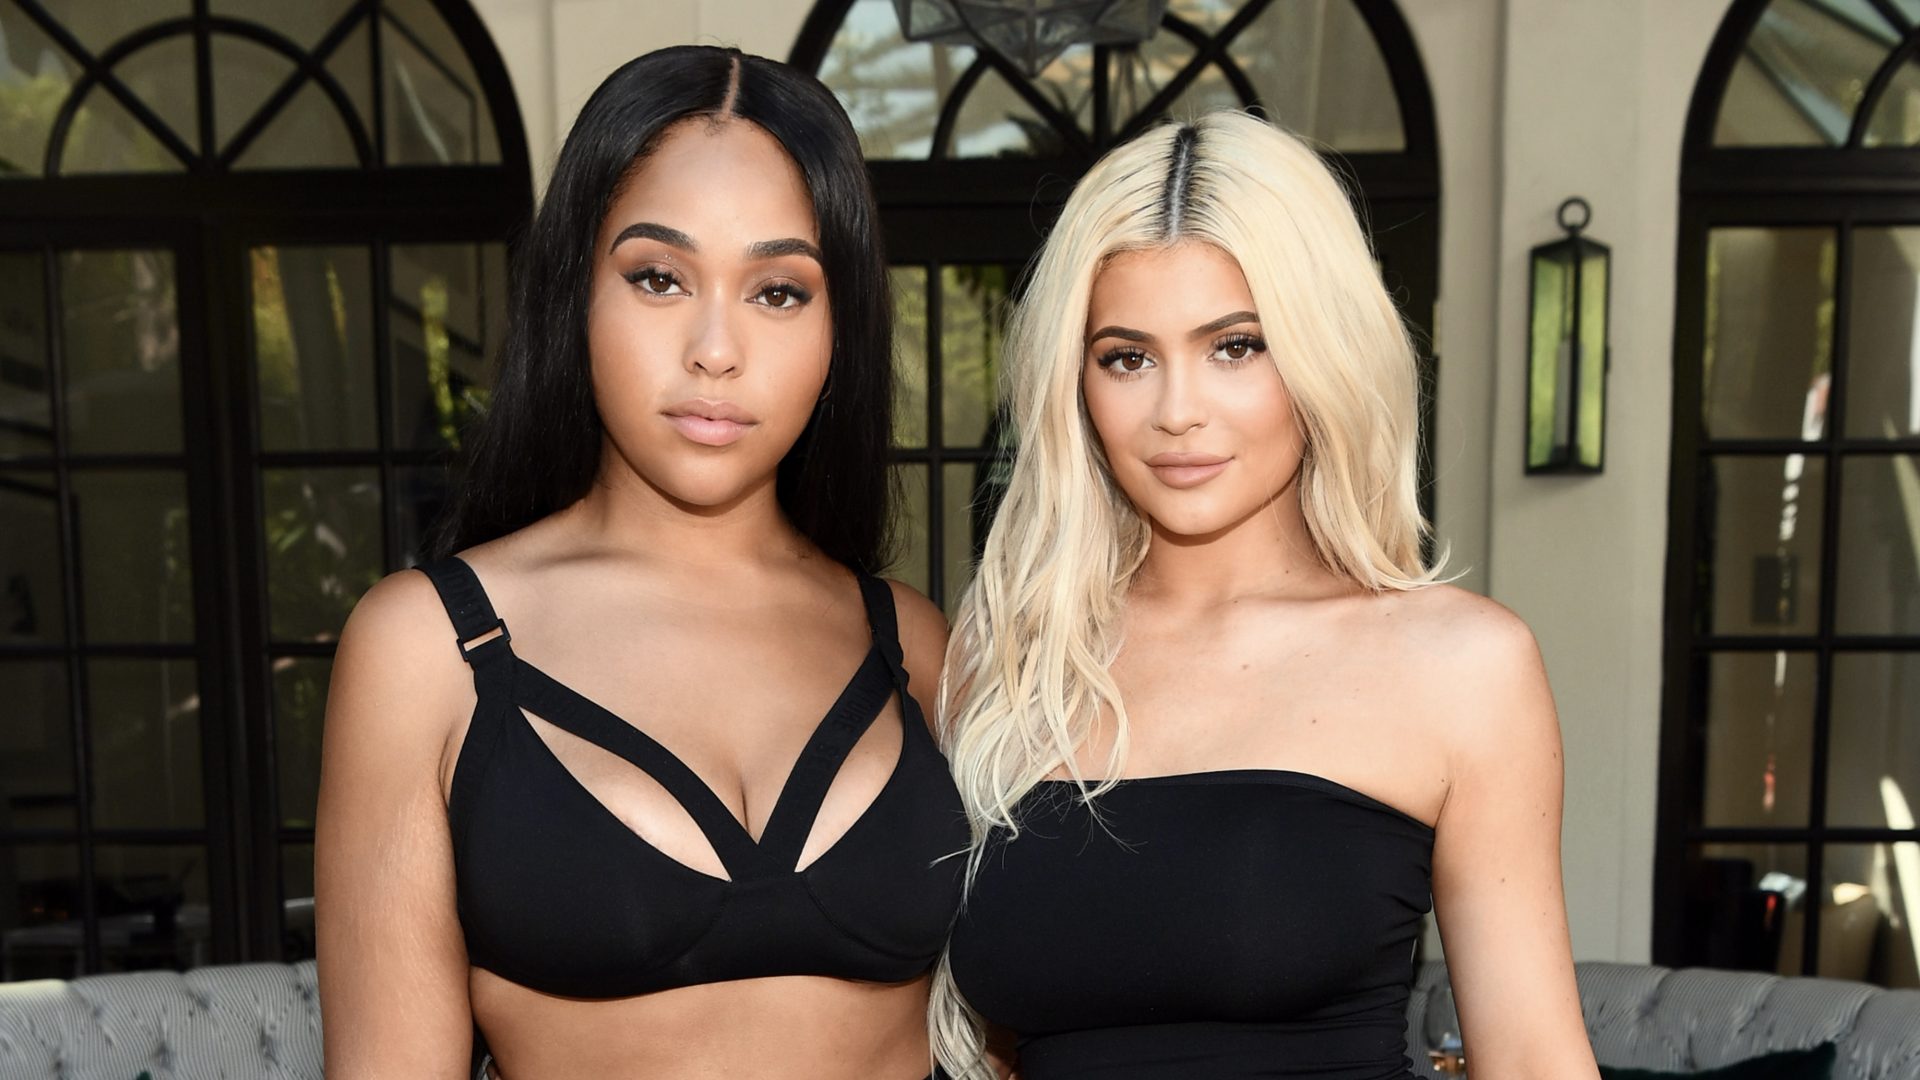 Photos from Kylie Jenner and Jordyn Woods' Friendship Through the Years